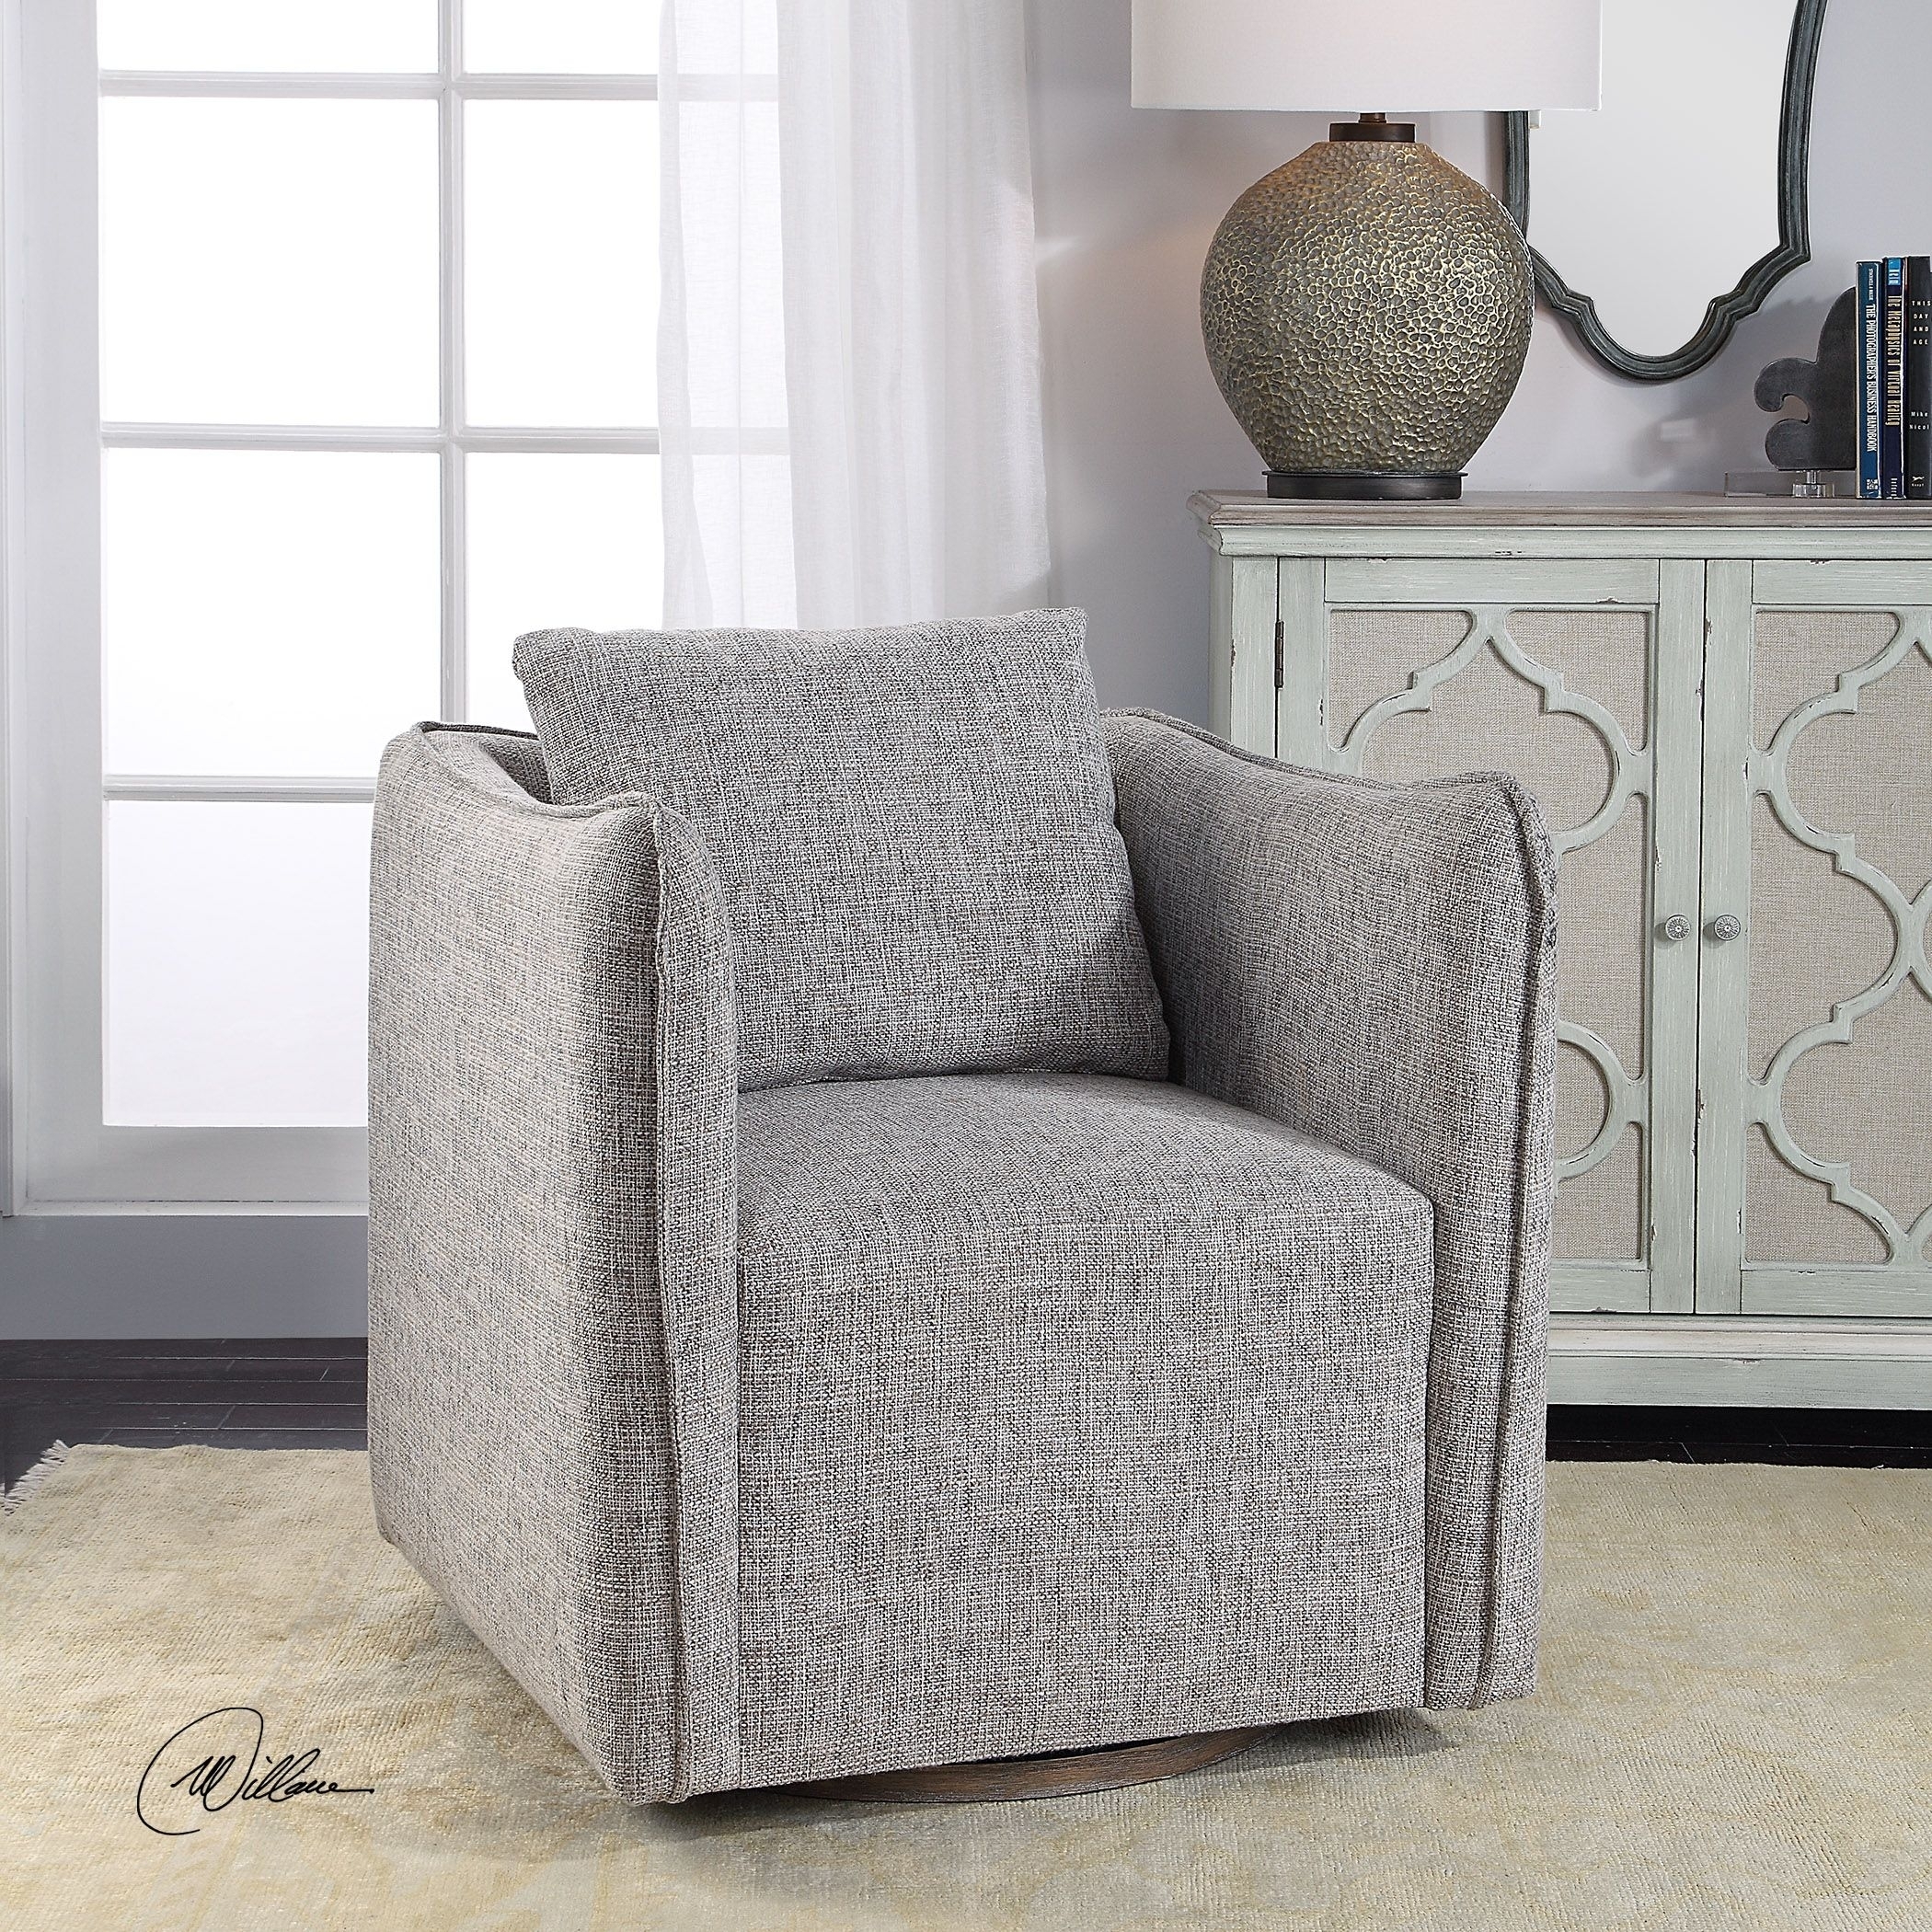 Aisling Swivel Chair - Image 2